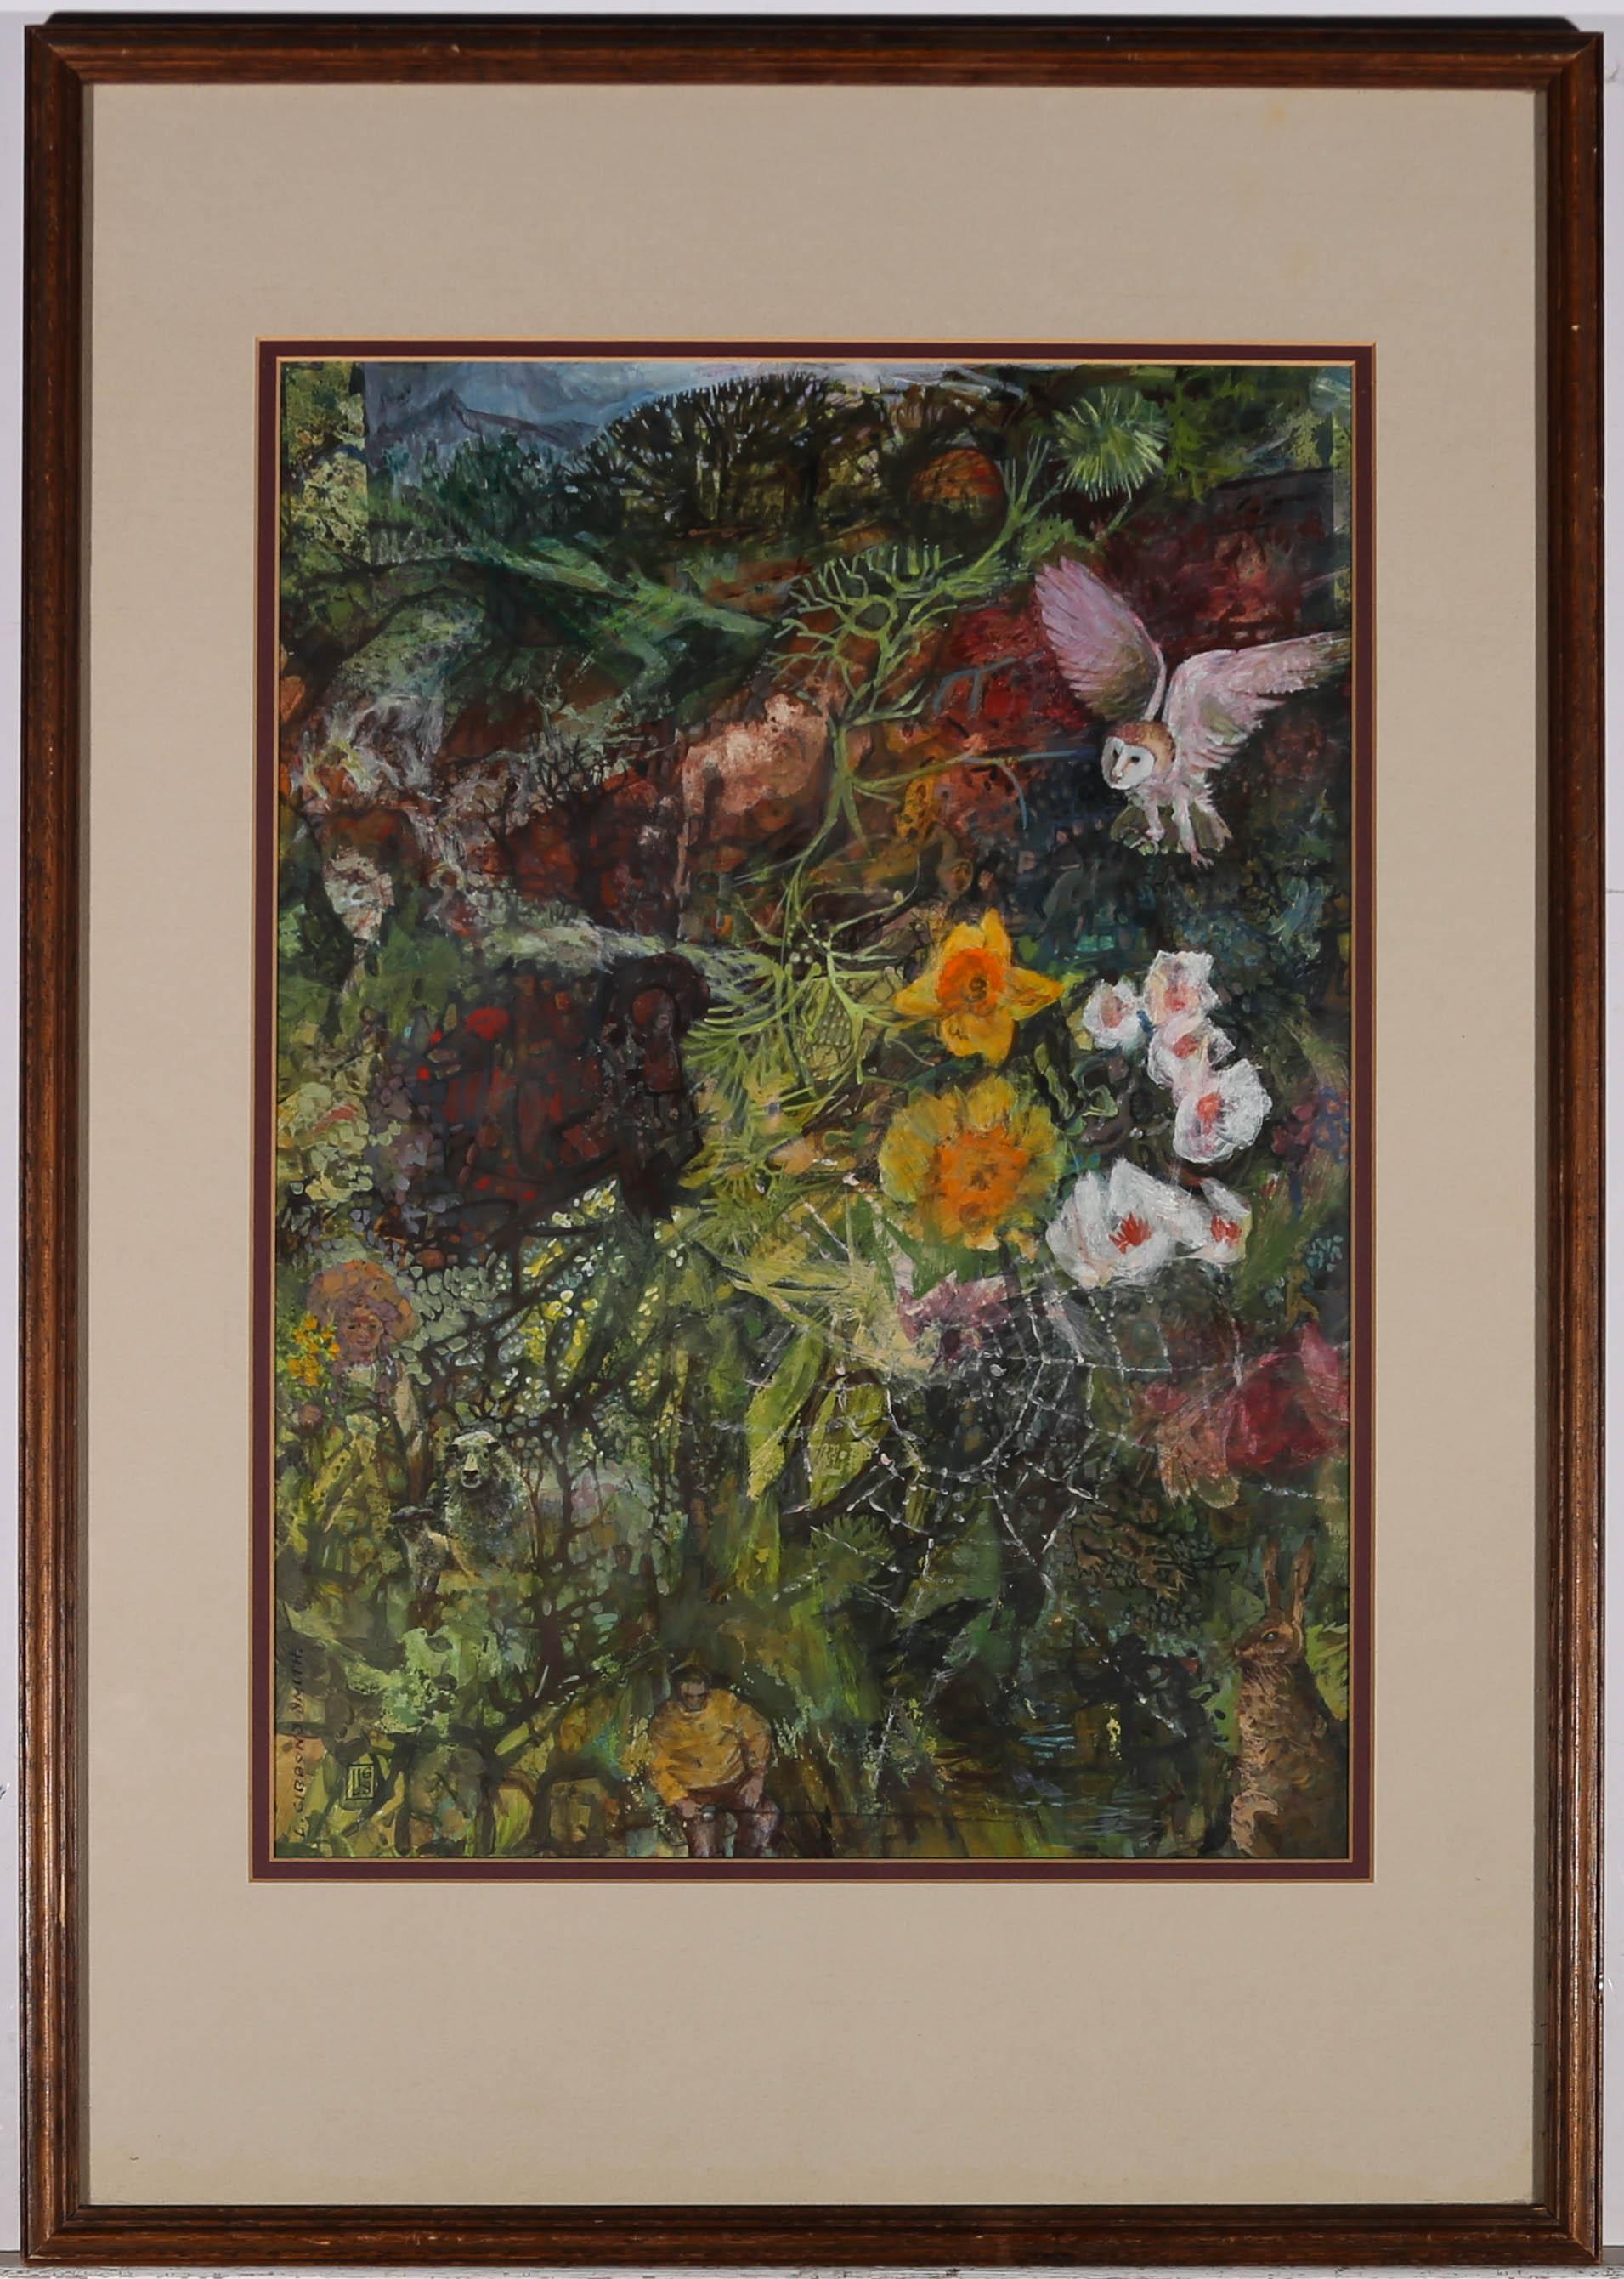 This dynamic acrylic study depicts spring motifs such as daffodils, a hare and an owl. A fisherman can be seen to the lower half of the painting surrounded by nature. Signed with a signature and a monogram. Label verso with title and information on